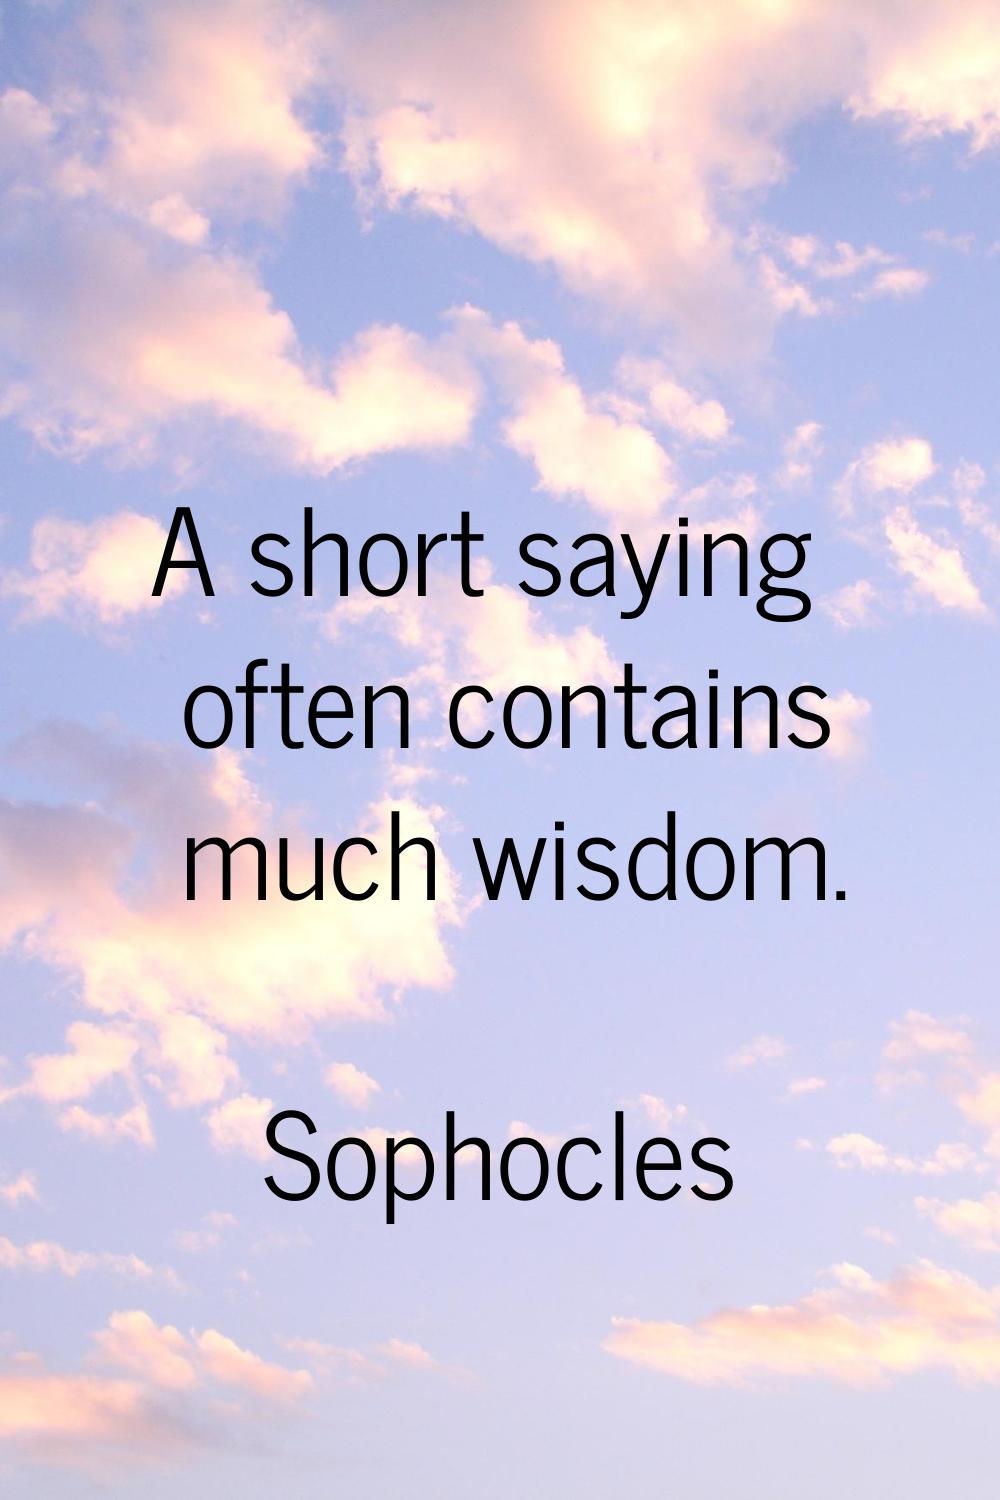 A short saying often contains much wisdom.